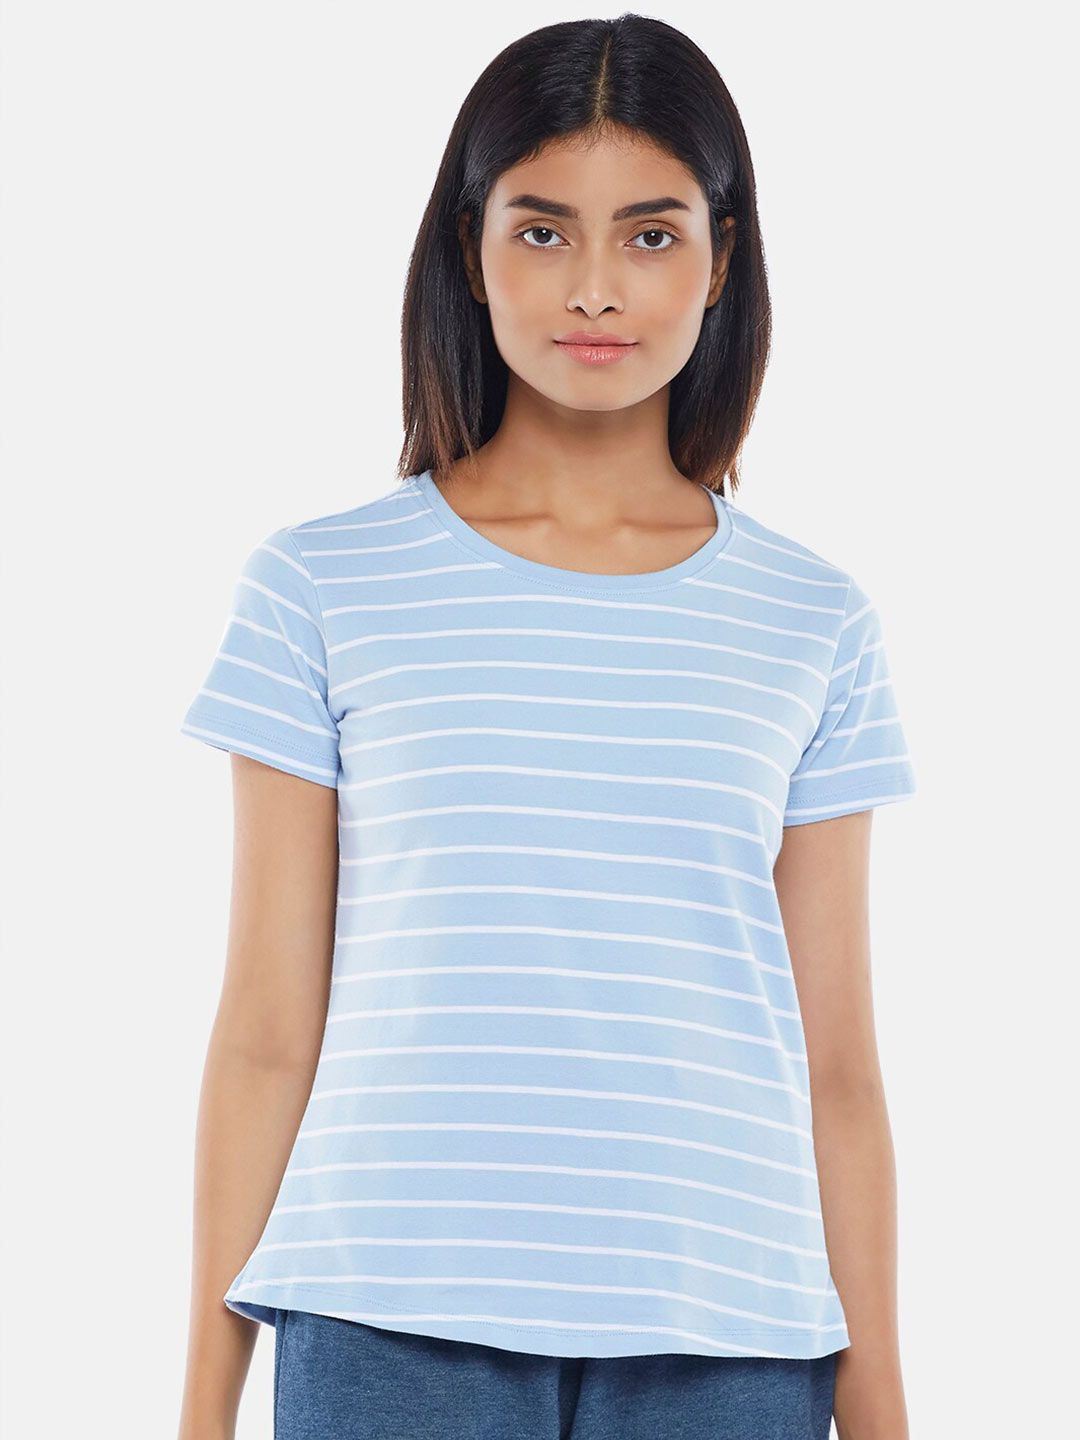 Dreamz by Pantaloons Blue Striped Lounge tshirt Price in India